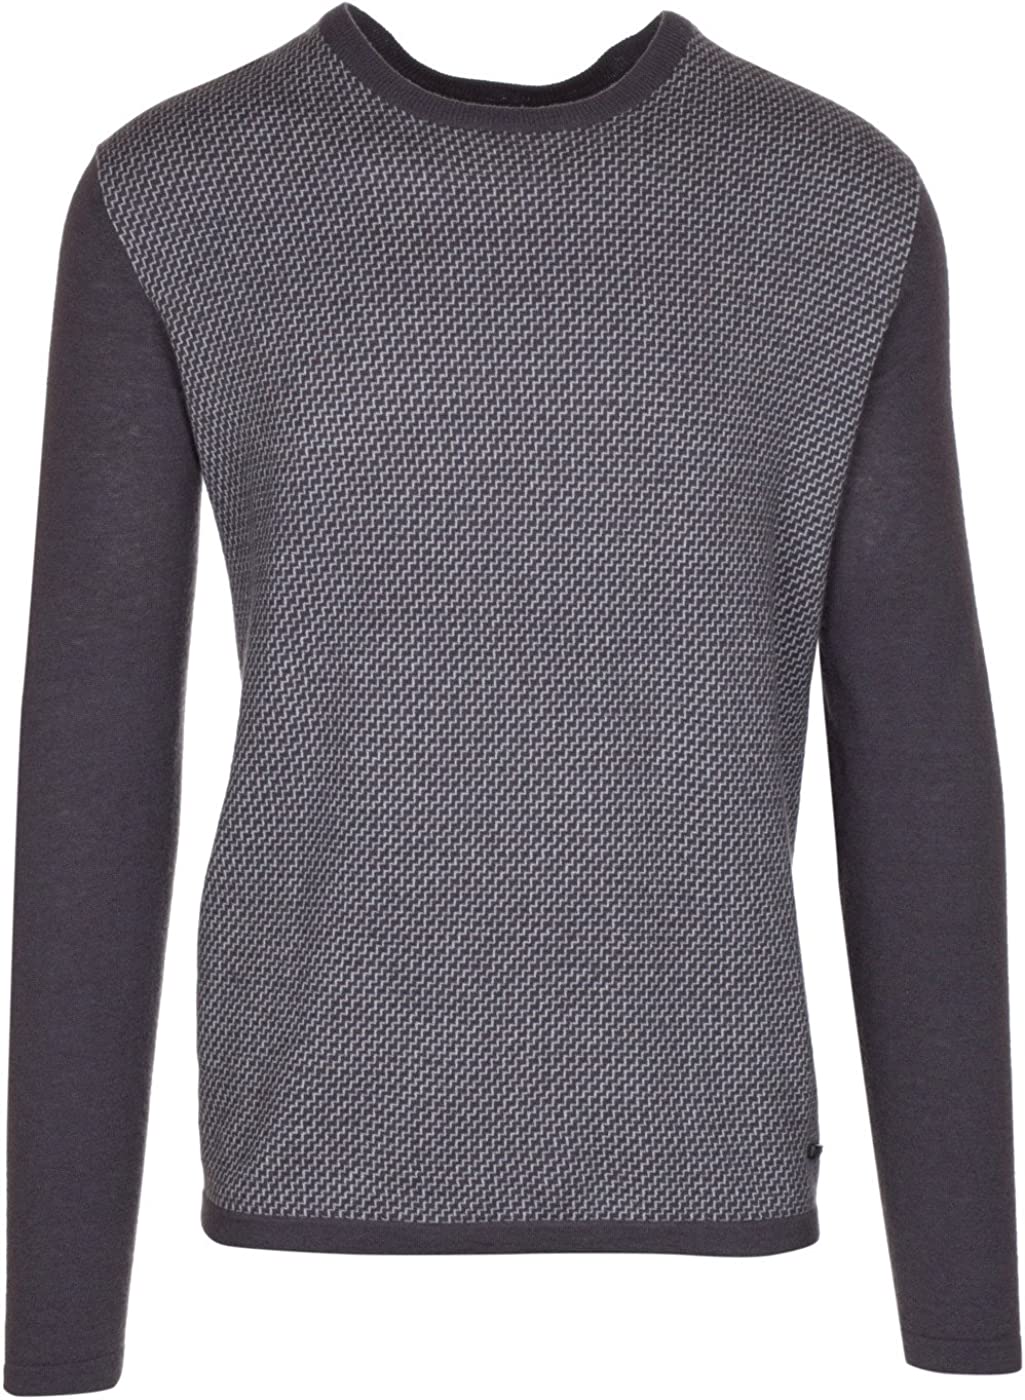 www.couturepoint.com-armani-collezioni-mens-dark-grey-100-wool-pullover-knitwear-high-neck-sweater-copy